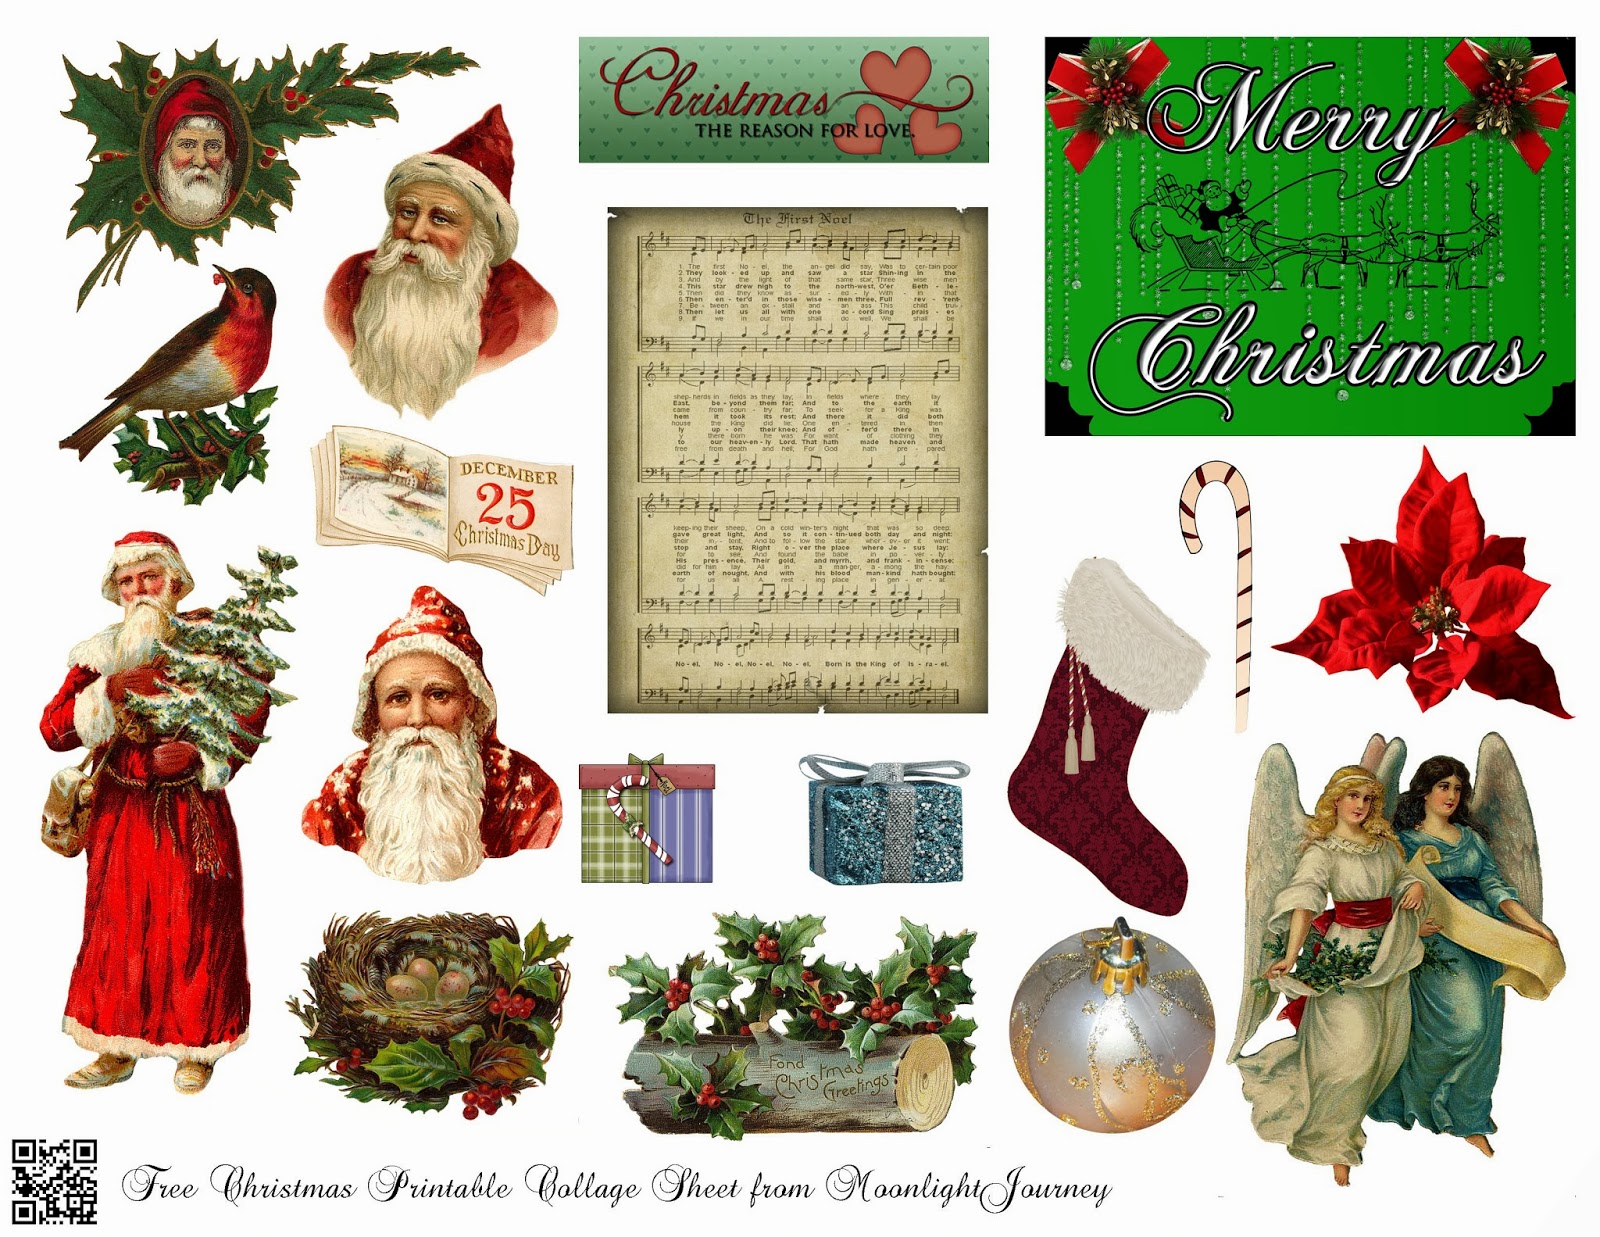 MoonlightJourney: Two Free Collage Sheets For Your Christmas Creating!